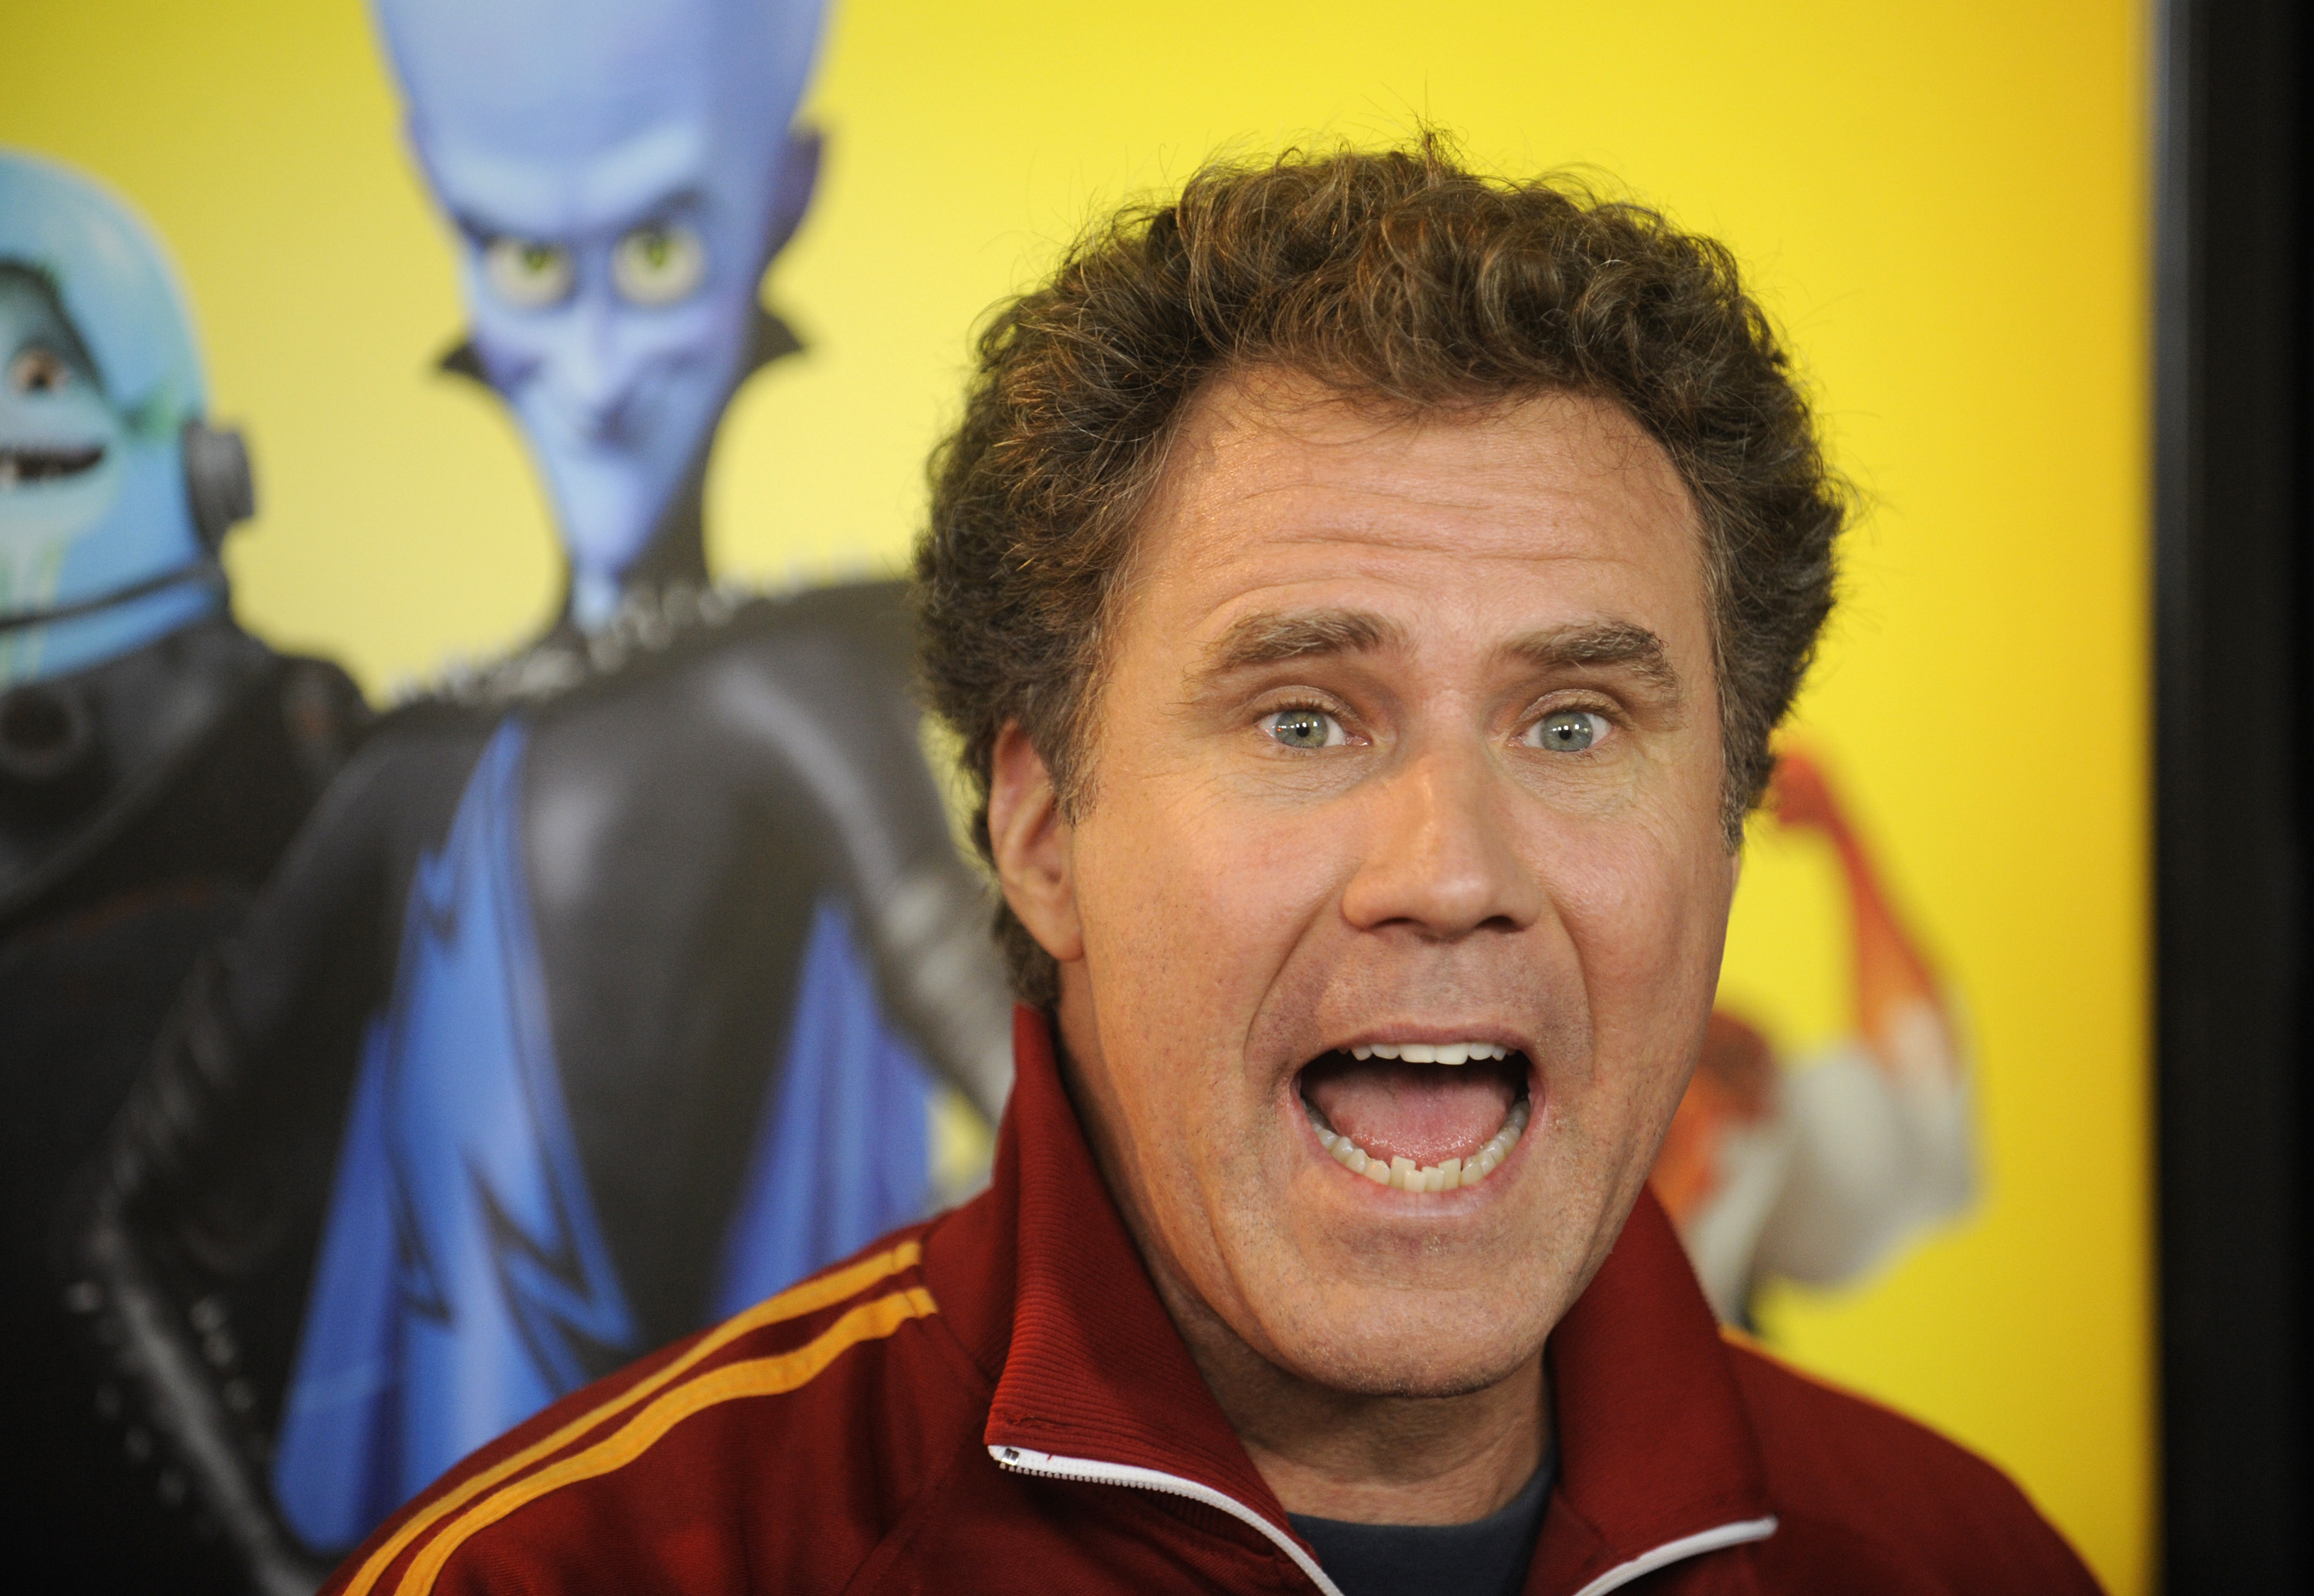 <p>Will Ferrell truly mastered his character in the animated film "Megamind." The 2010 movie about an extraterrestrial mastermind who turns from supervillain to superhero was praised for its strong visuals and cast performance. "Megamind" did face some criticism for unoriginality, but it still grossed over $321 million worldwide.</p>